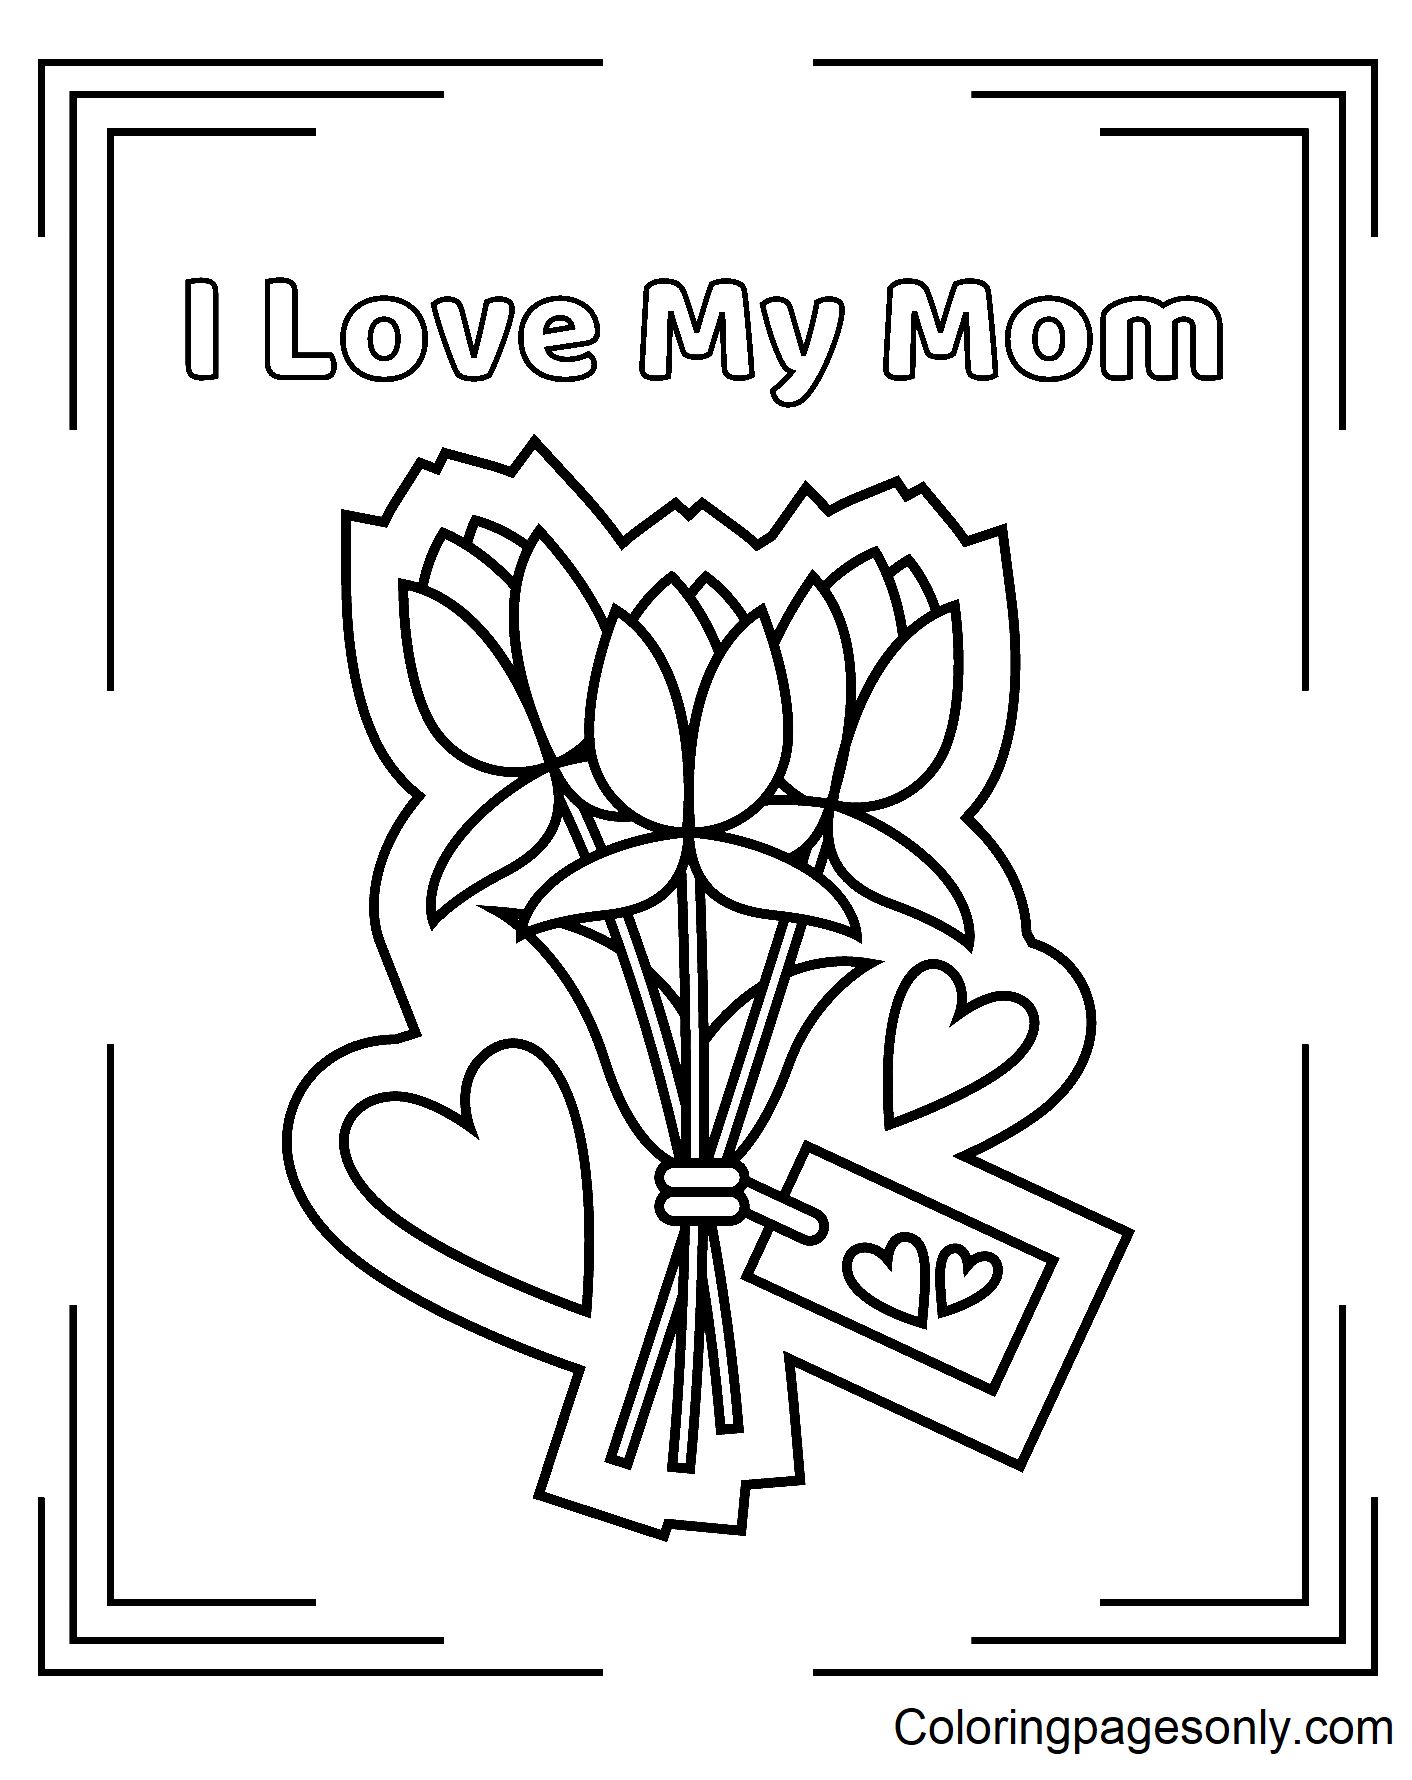 I Love My Mom Coloring Page